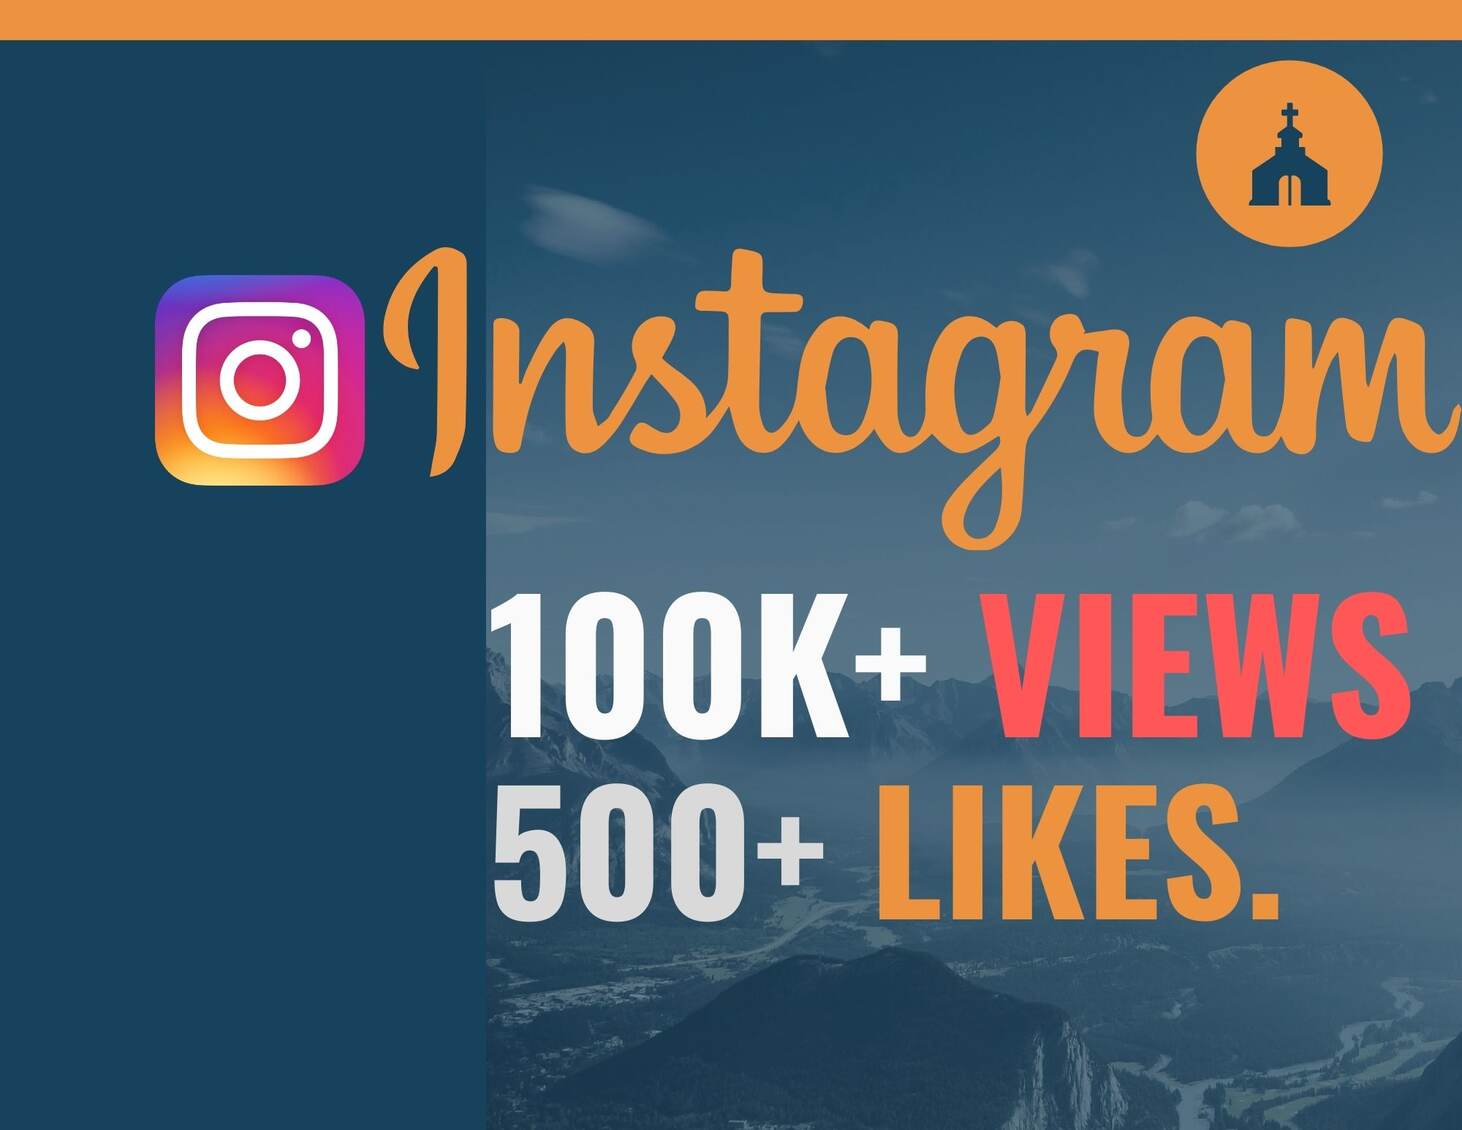 You will get 100k+ Instagram Views Plus 500+ Likes